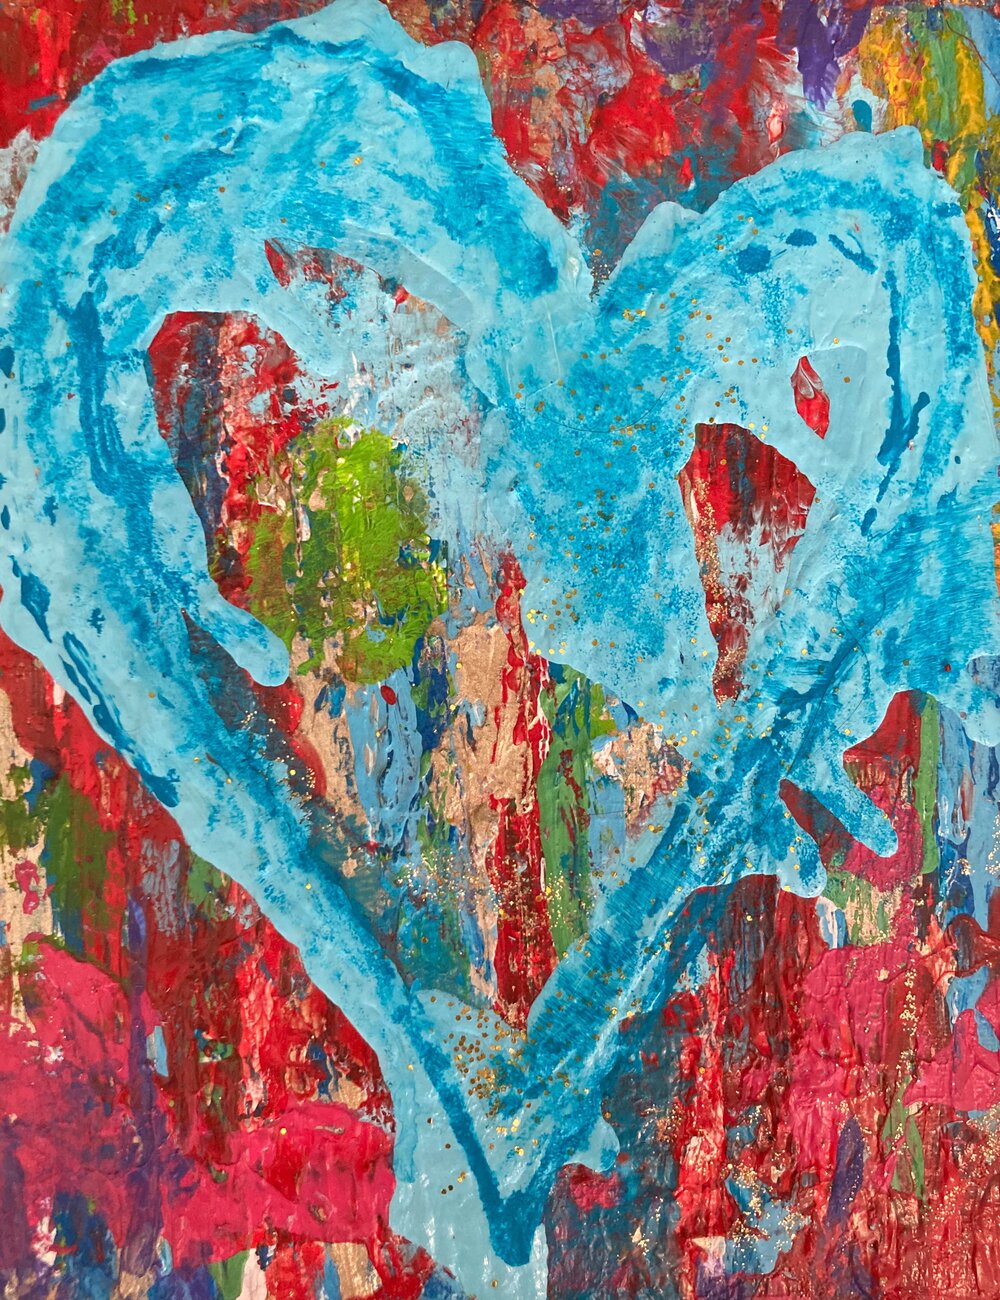 Heart Painting, Painting of Hearts, Canvas of Hearts, Acrylic